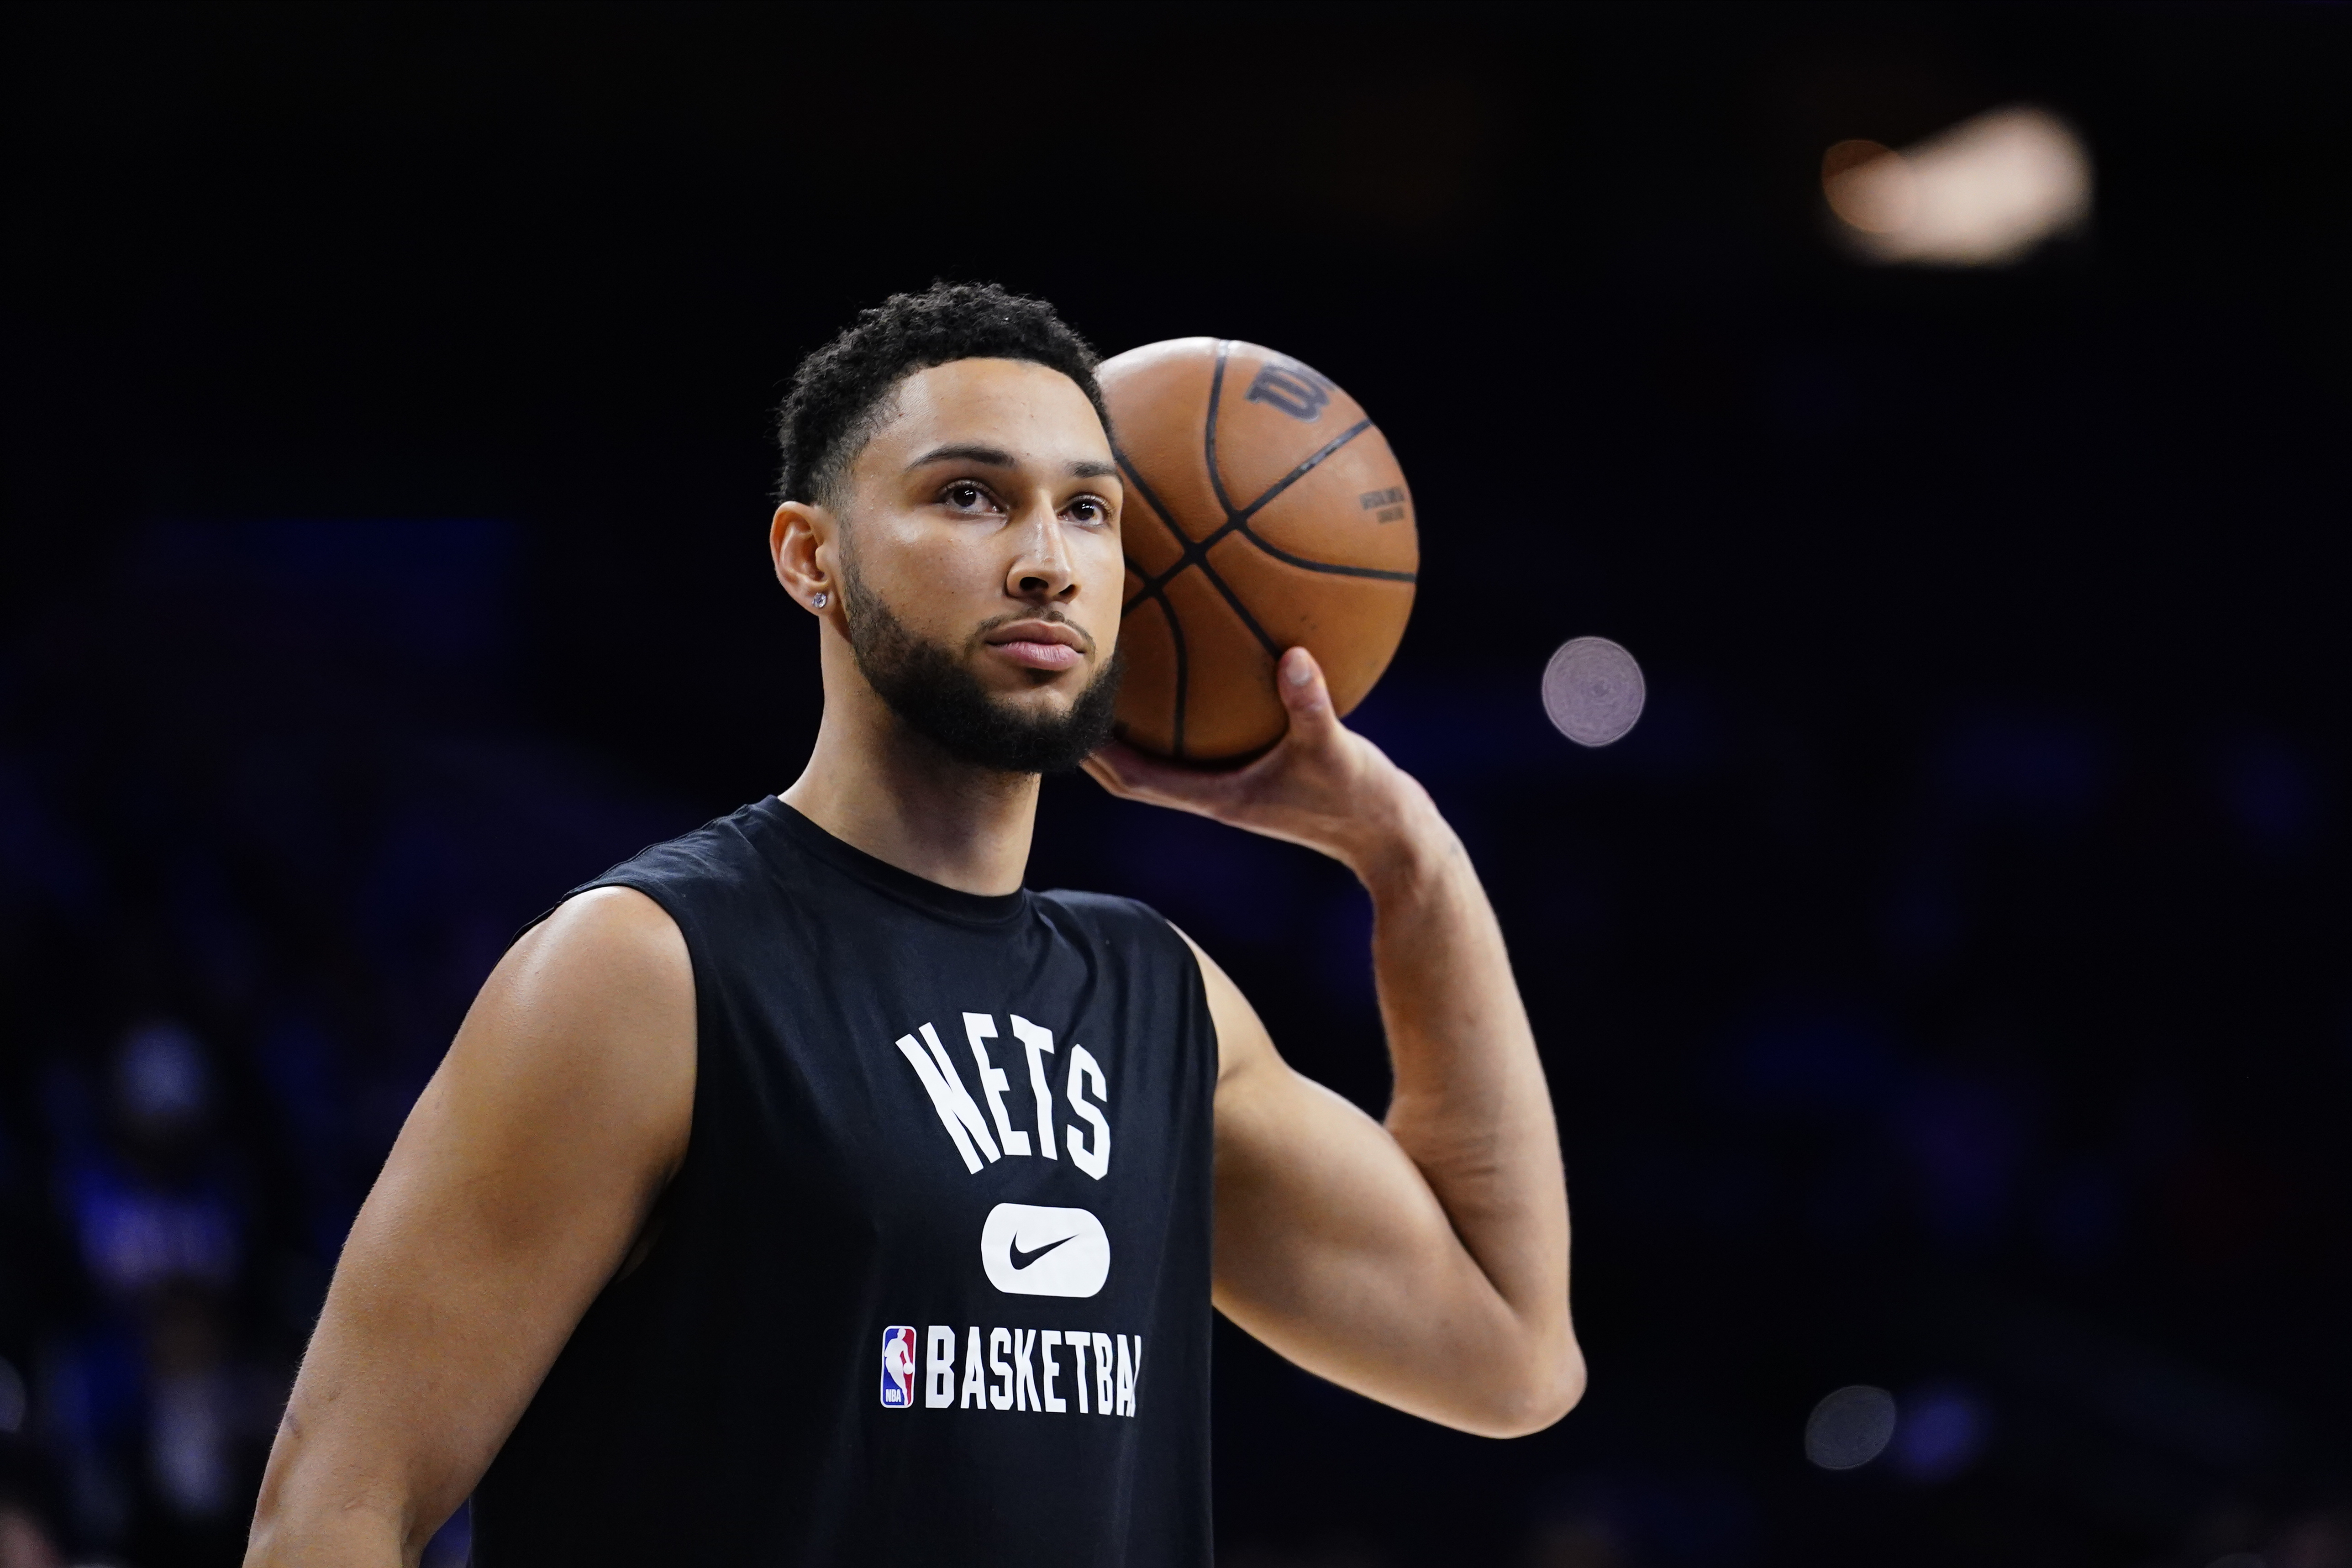 Nets would be wise to embrace their New Jersey roots - NetsDaily